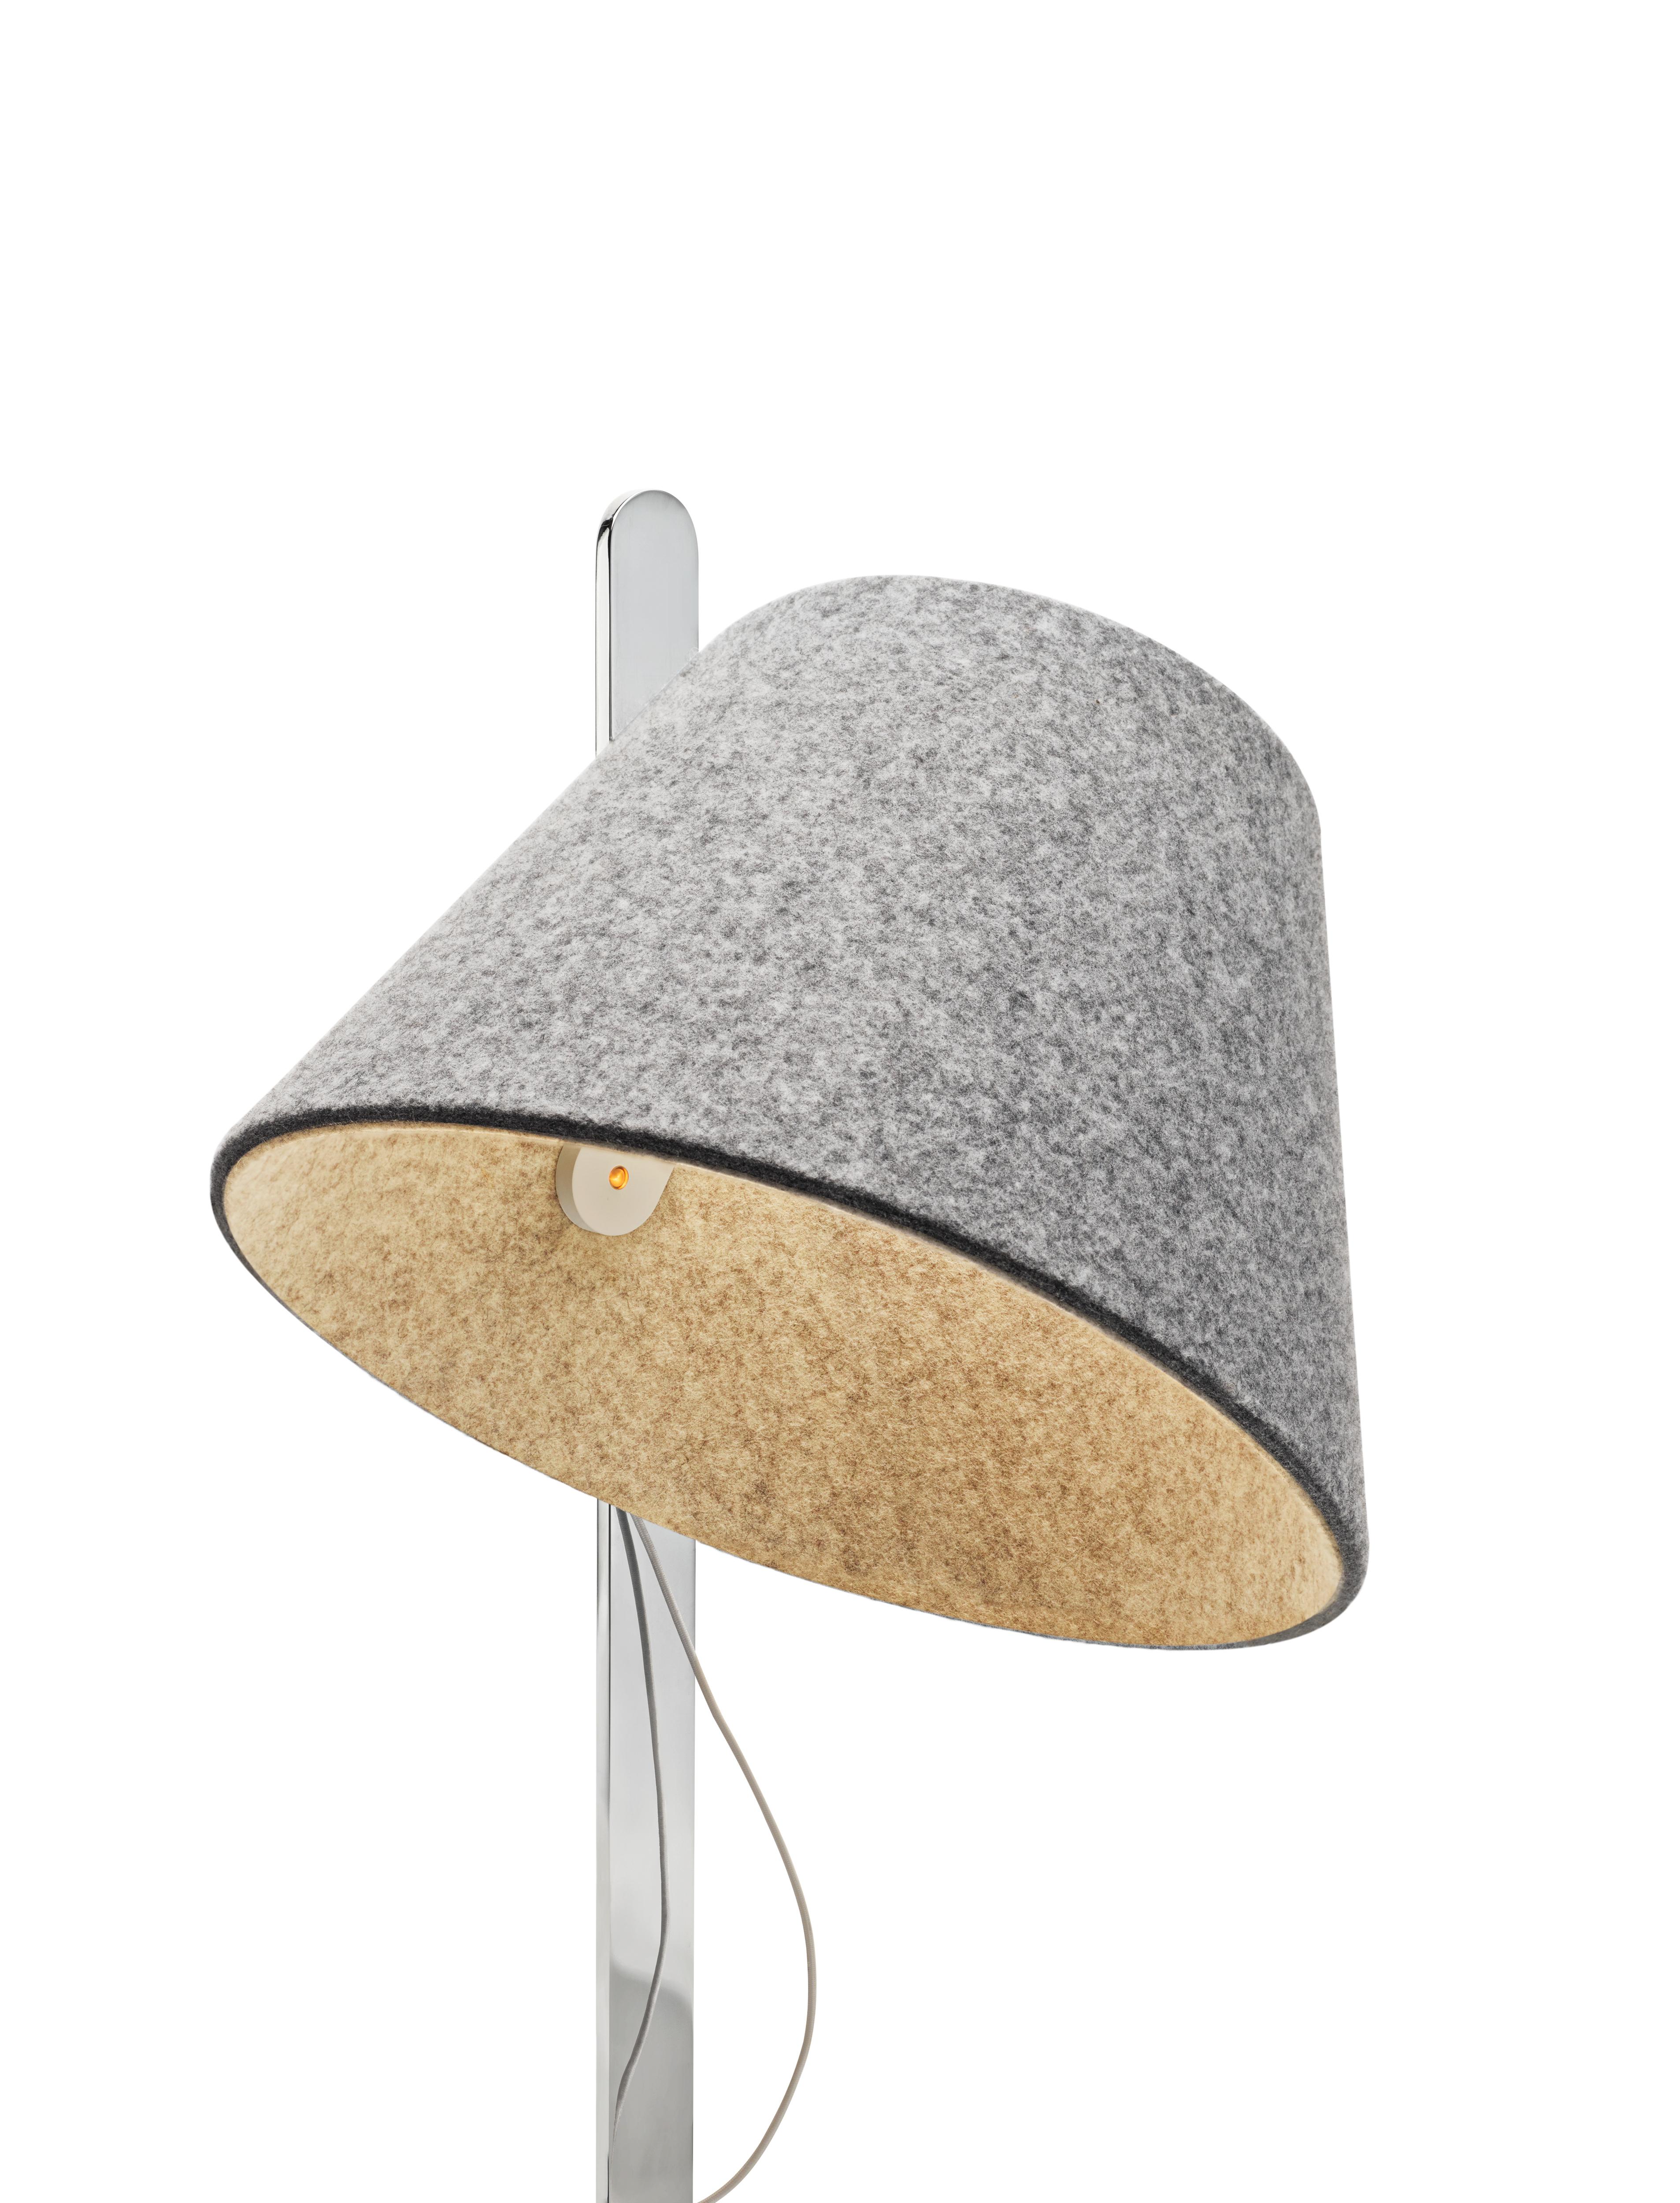 American Lana Small Table Lamp in Moss and Grey with White Base by Pablo Designs